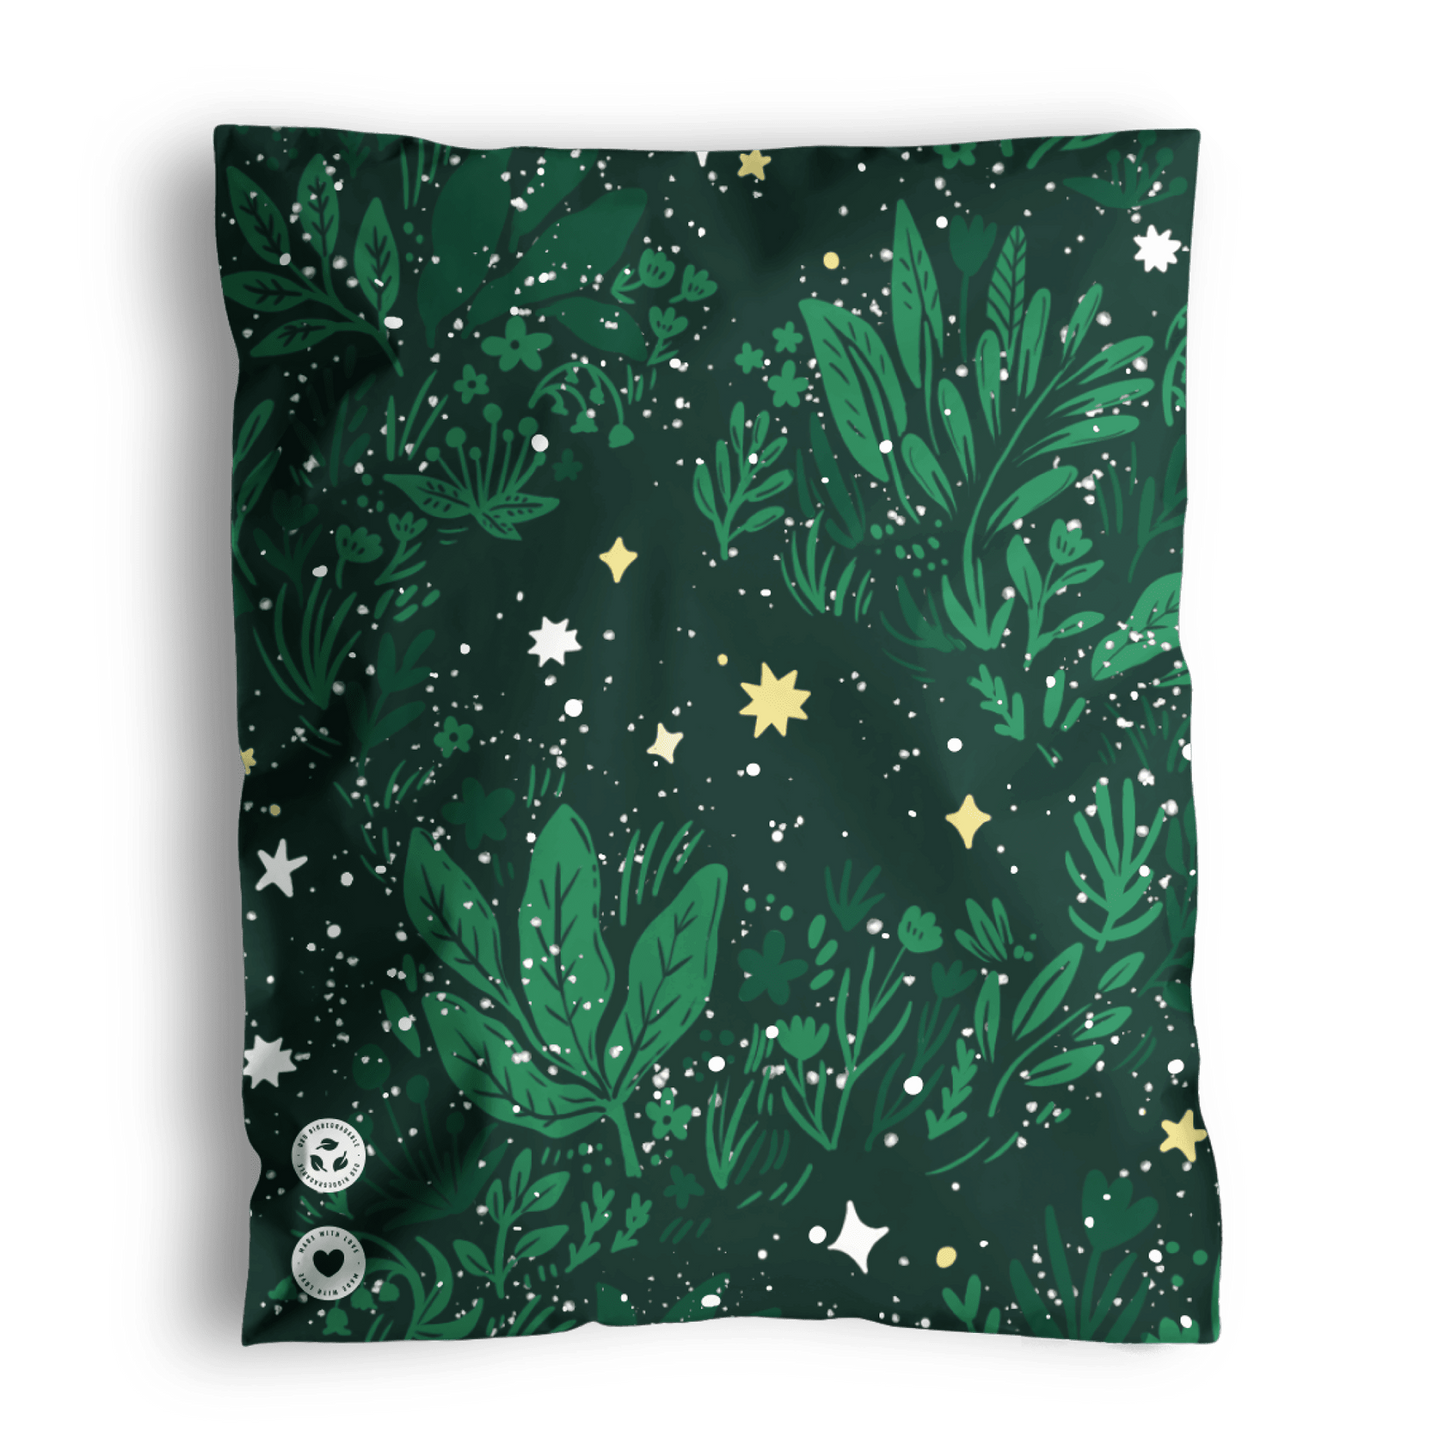 A patterned bandana with green foliage and star motifs on a dark background, packaged in impack.co Midnight Lush Mailers 10" x 13".